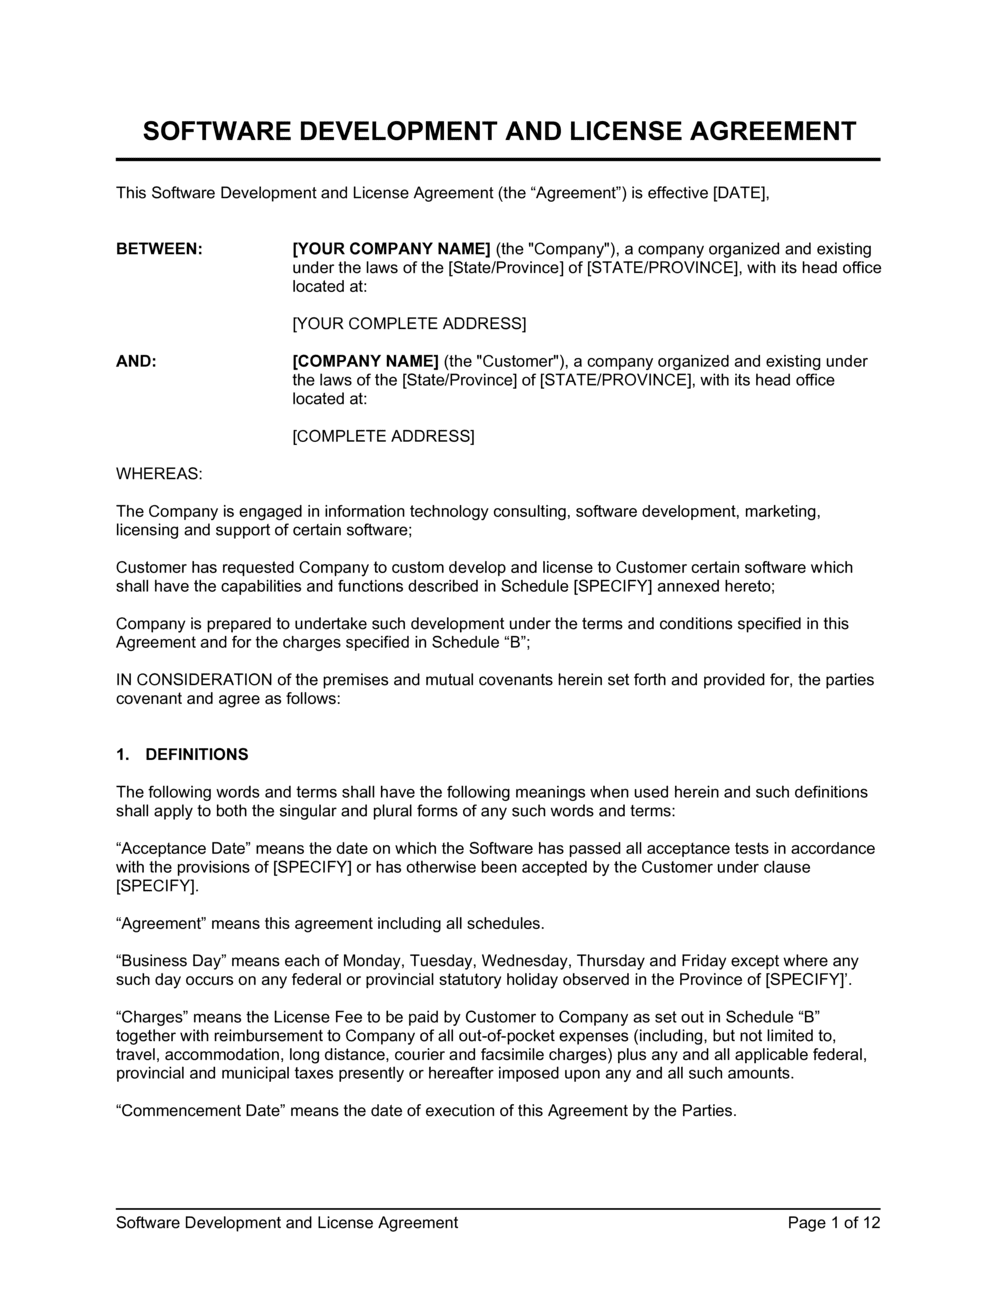 Software Development and License Agreement Template  by Business Within software warranty agreement template